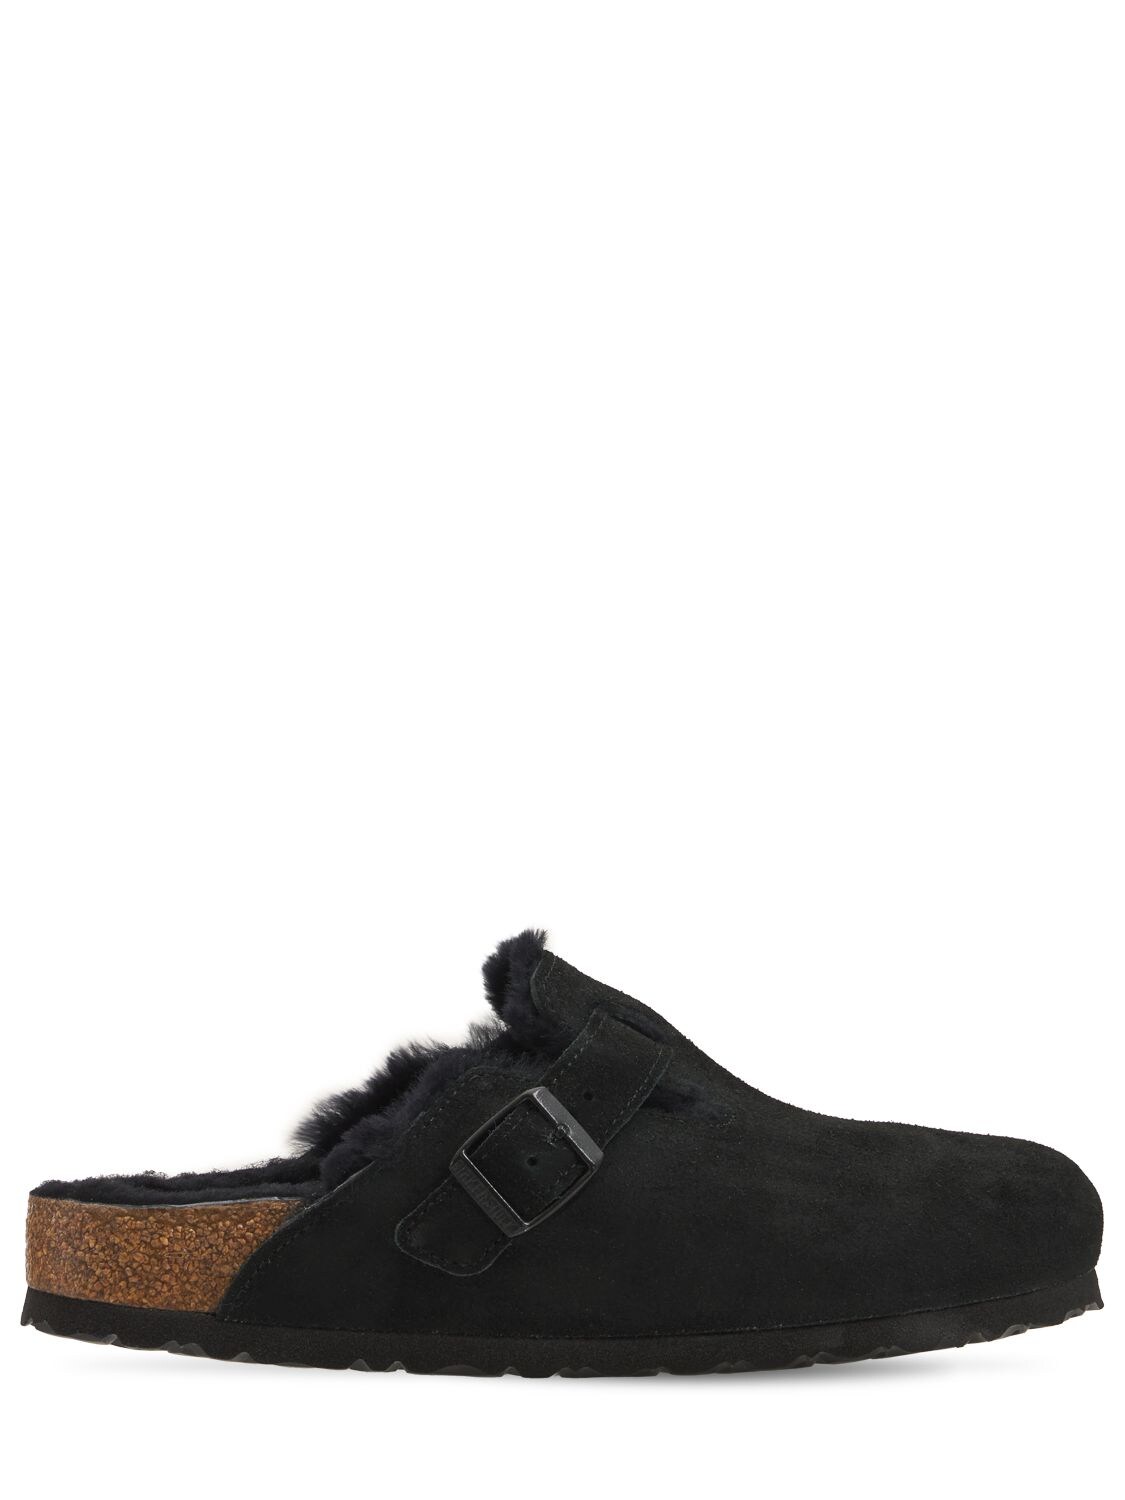 Boston Shearling & Suede Loafers